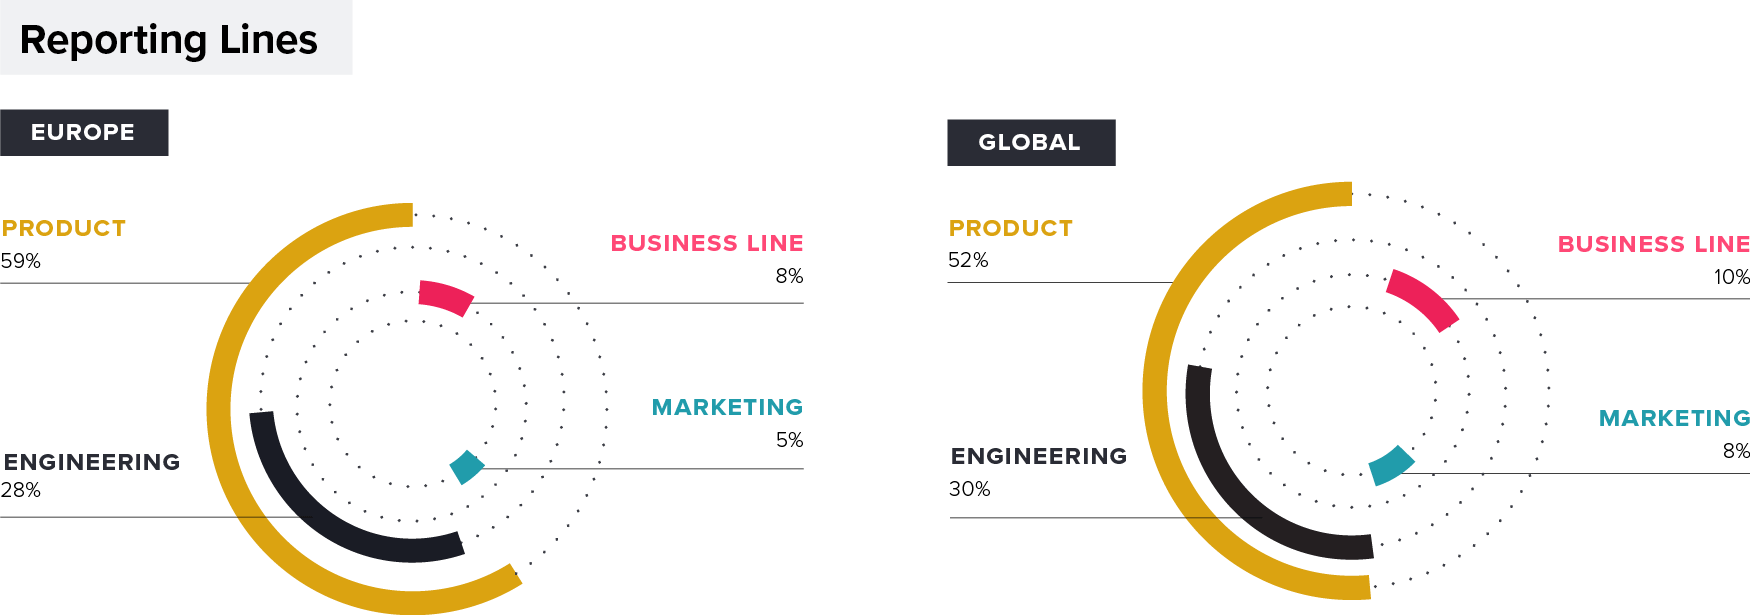 Product Management Reporting Lines: Europe